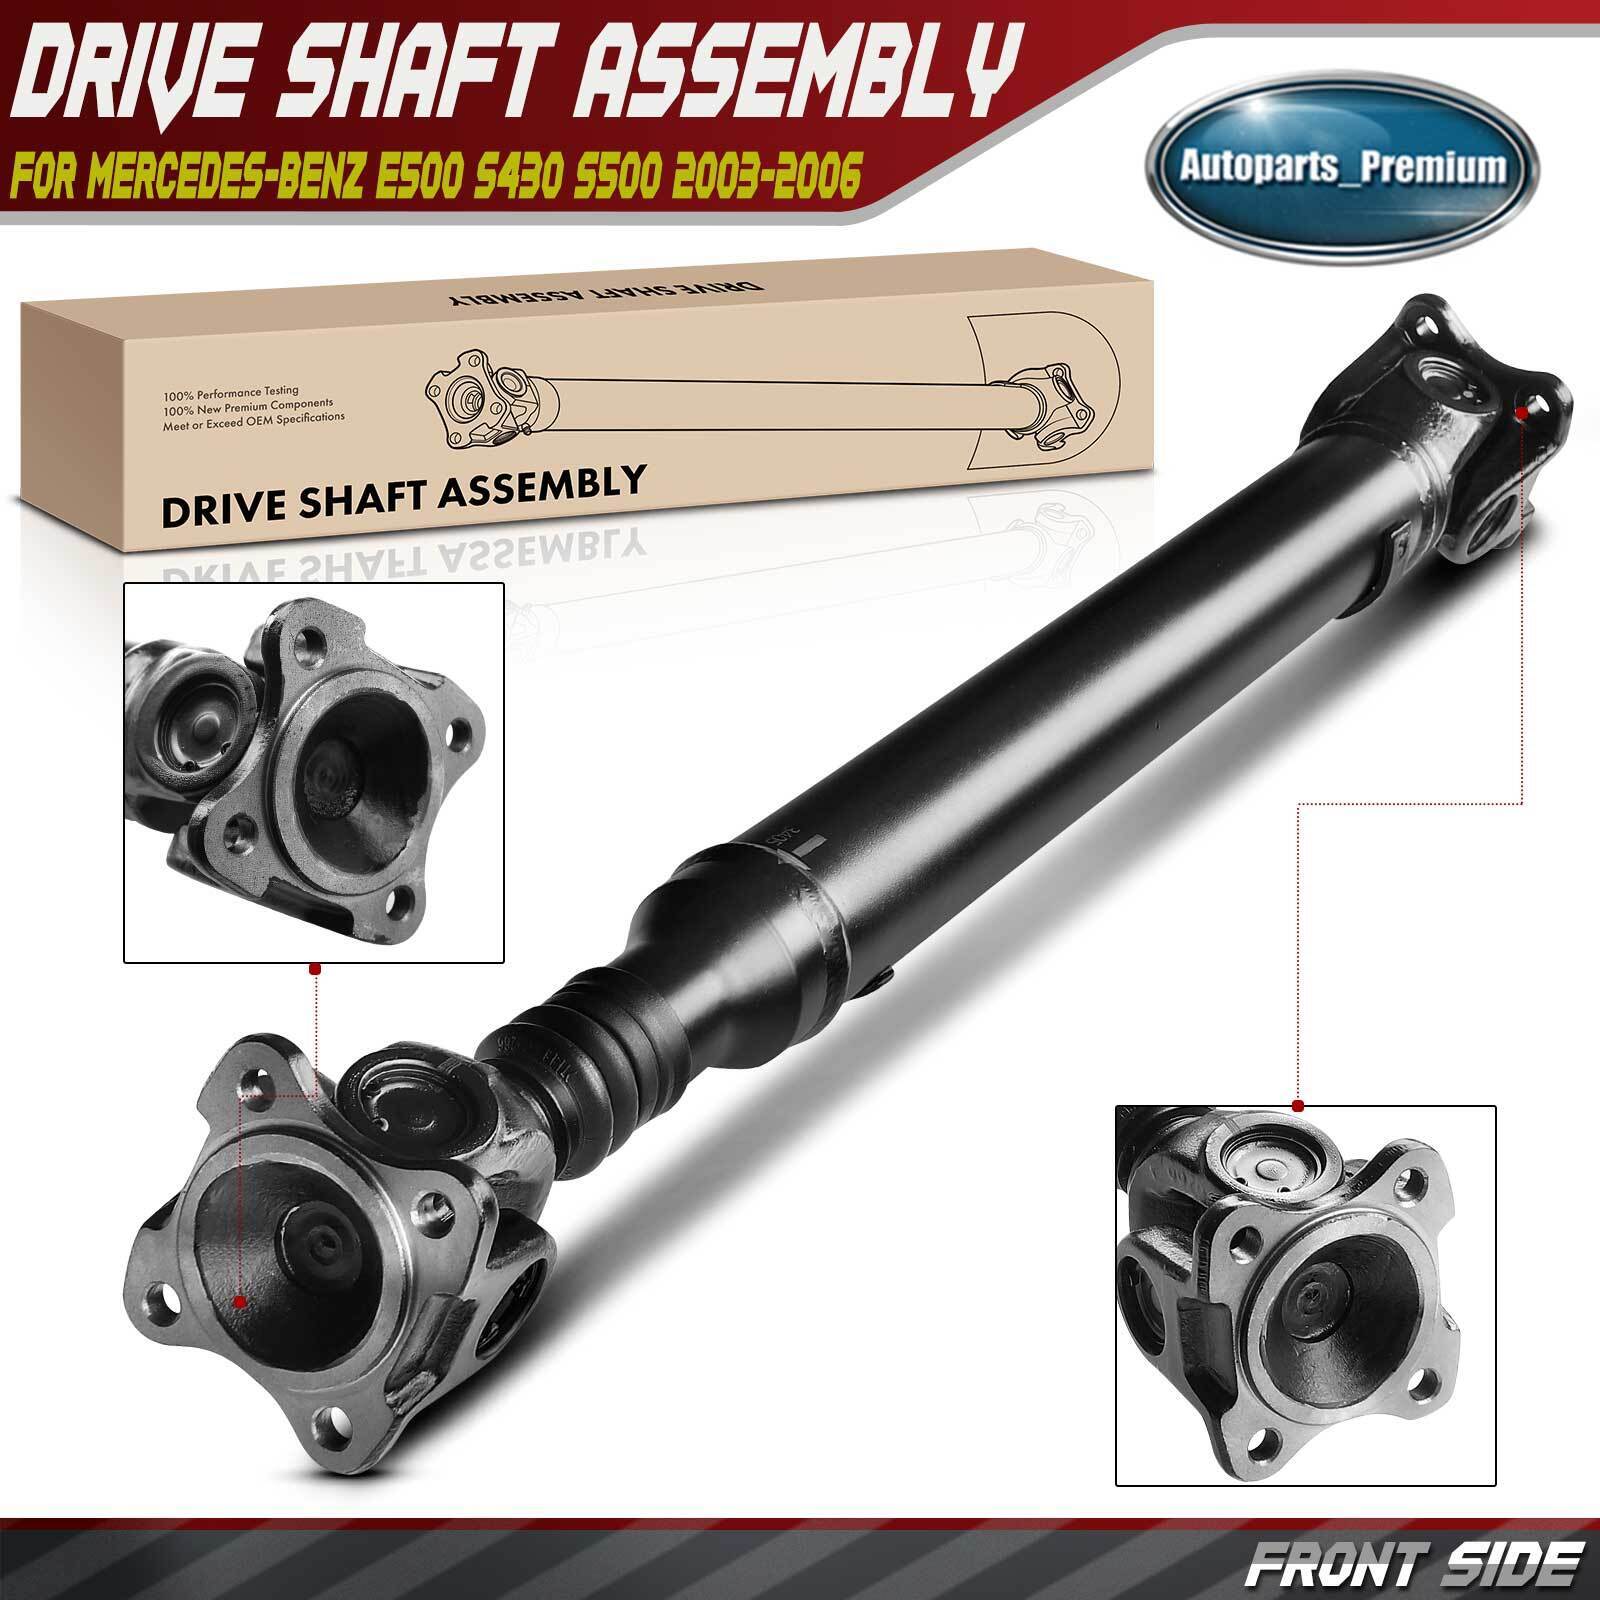 Front Driveshaft Assembly for Mercedes-Benz W211 W220 E500 S500 S430 AWD Auto